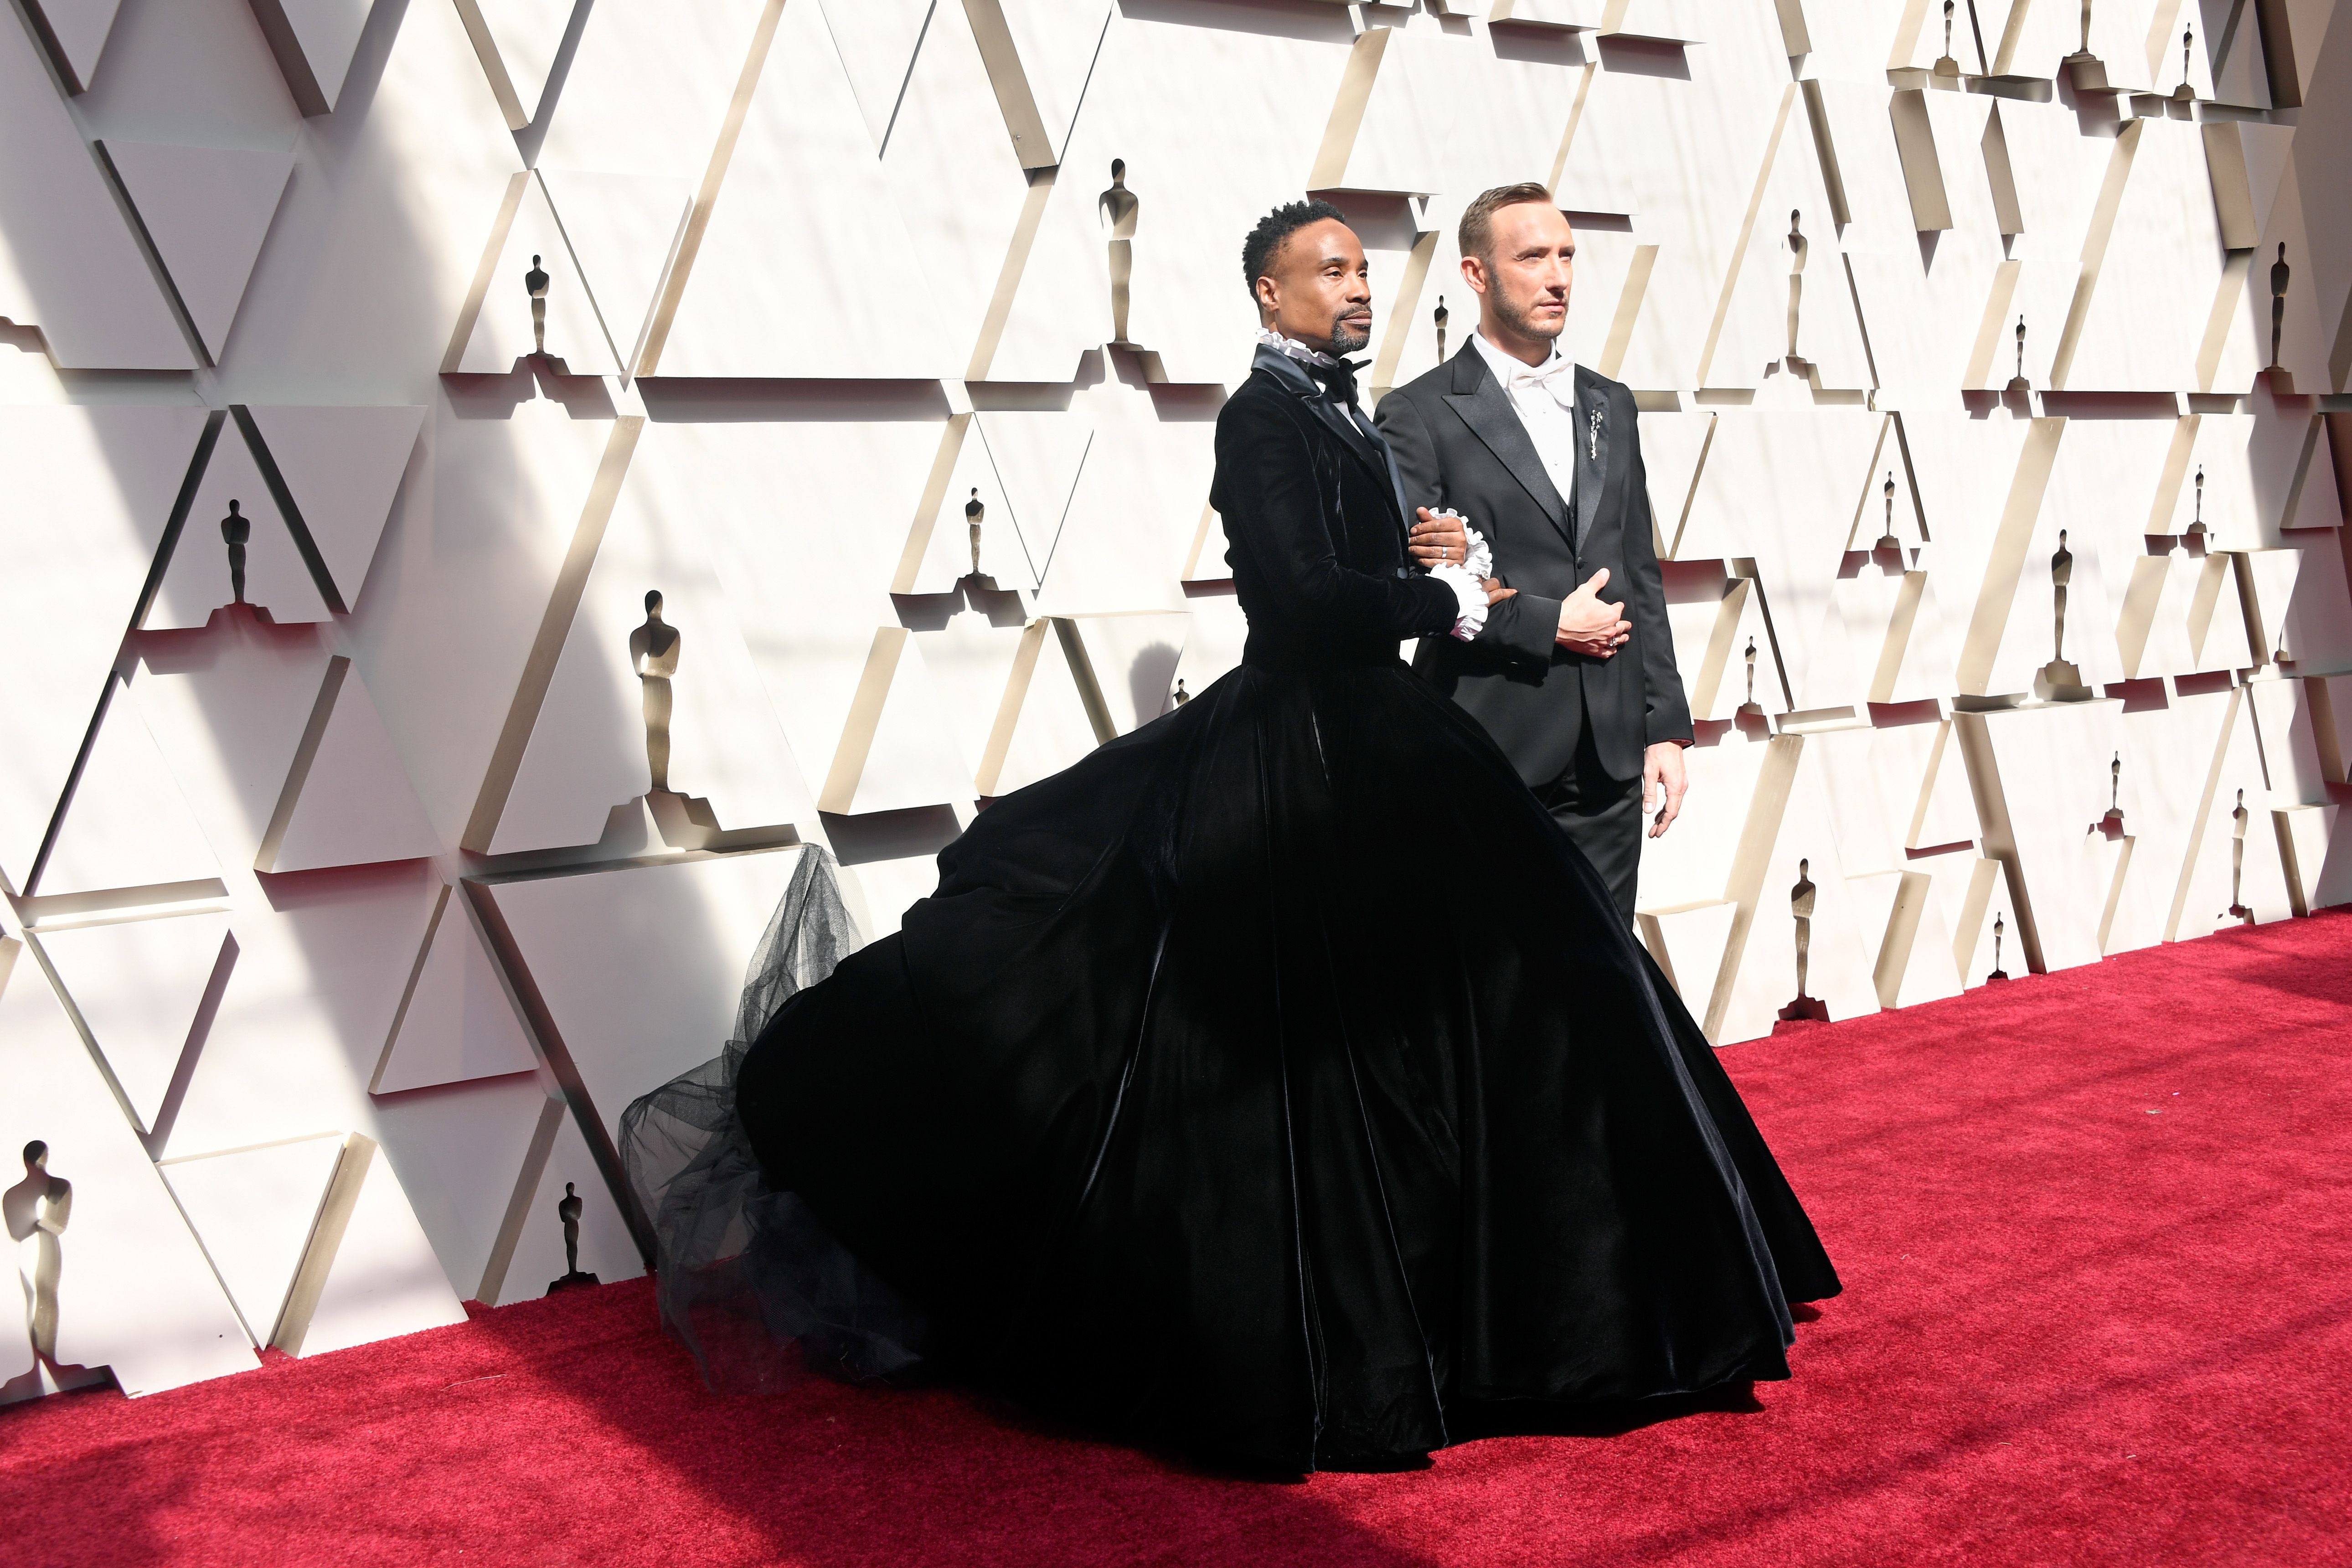 tuxedo gown at the oscars